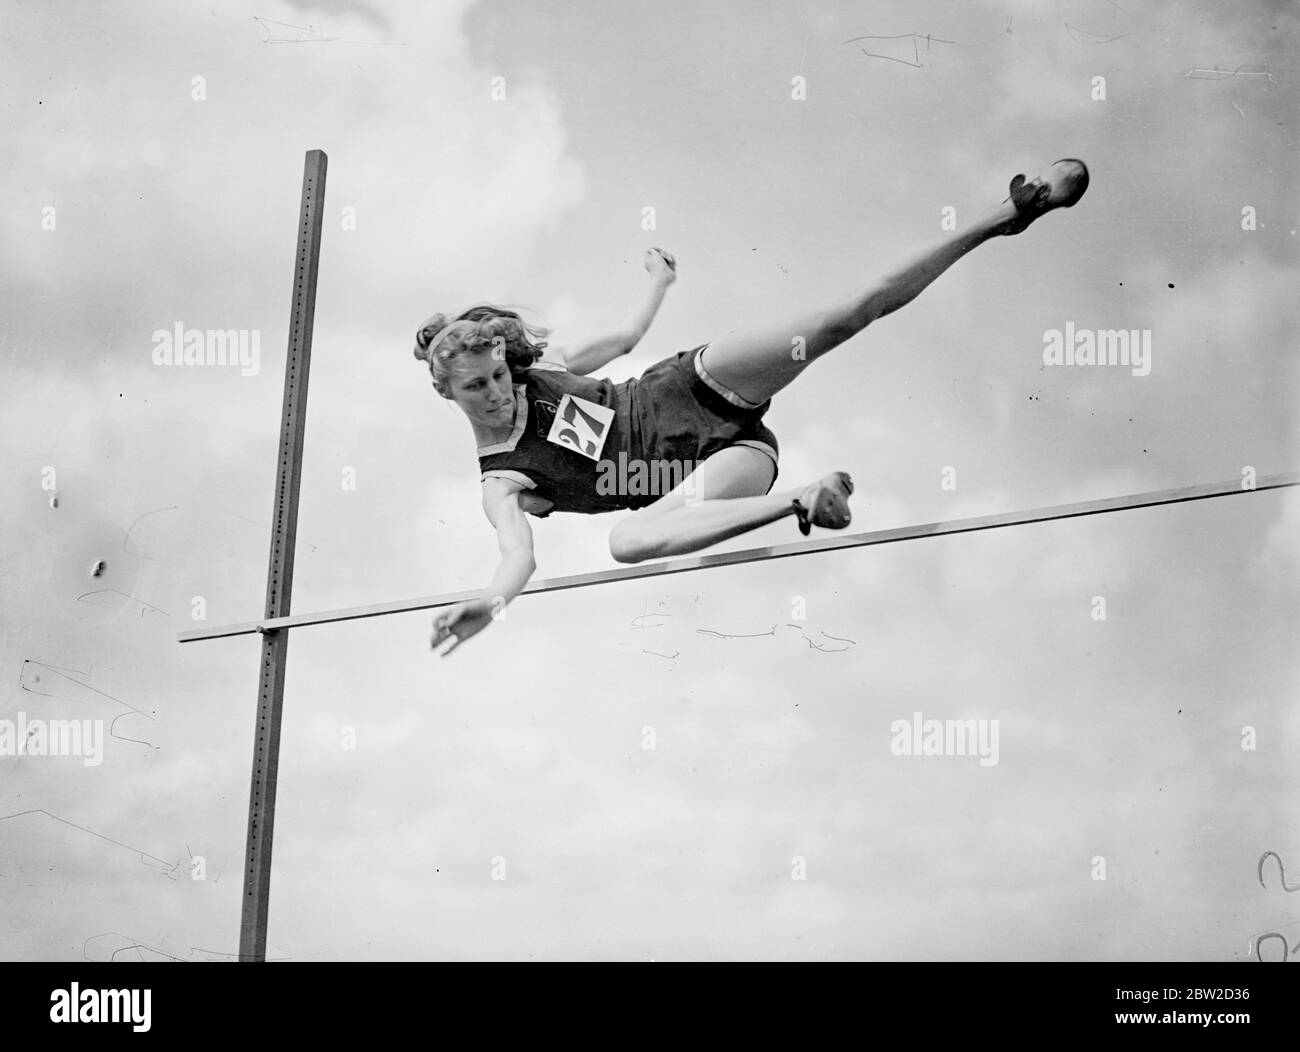 The Civil Service Sports Took Place at the Civil Service Sports Ground at Chiswick, London. Photo Shows: Miss Dorothy Odam, world record high jumper with 5 feet 5 inches competing in the high jump. 19 June 1939 Stock Photo